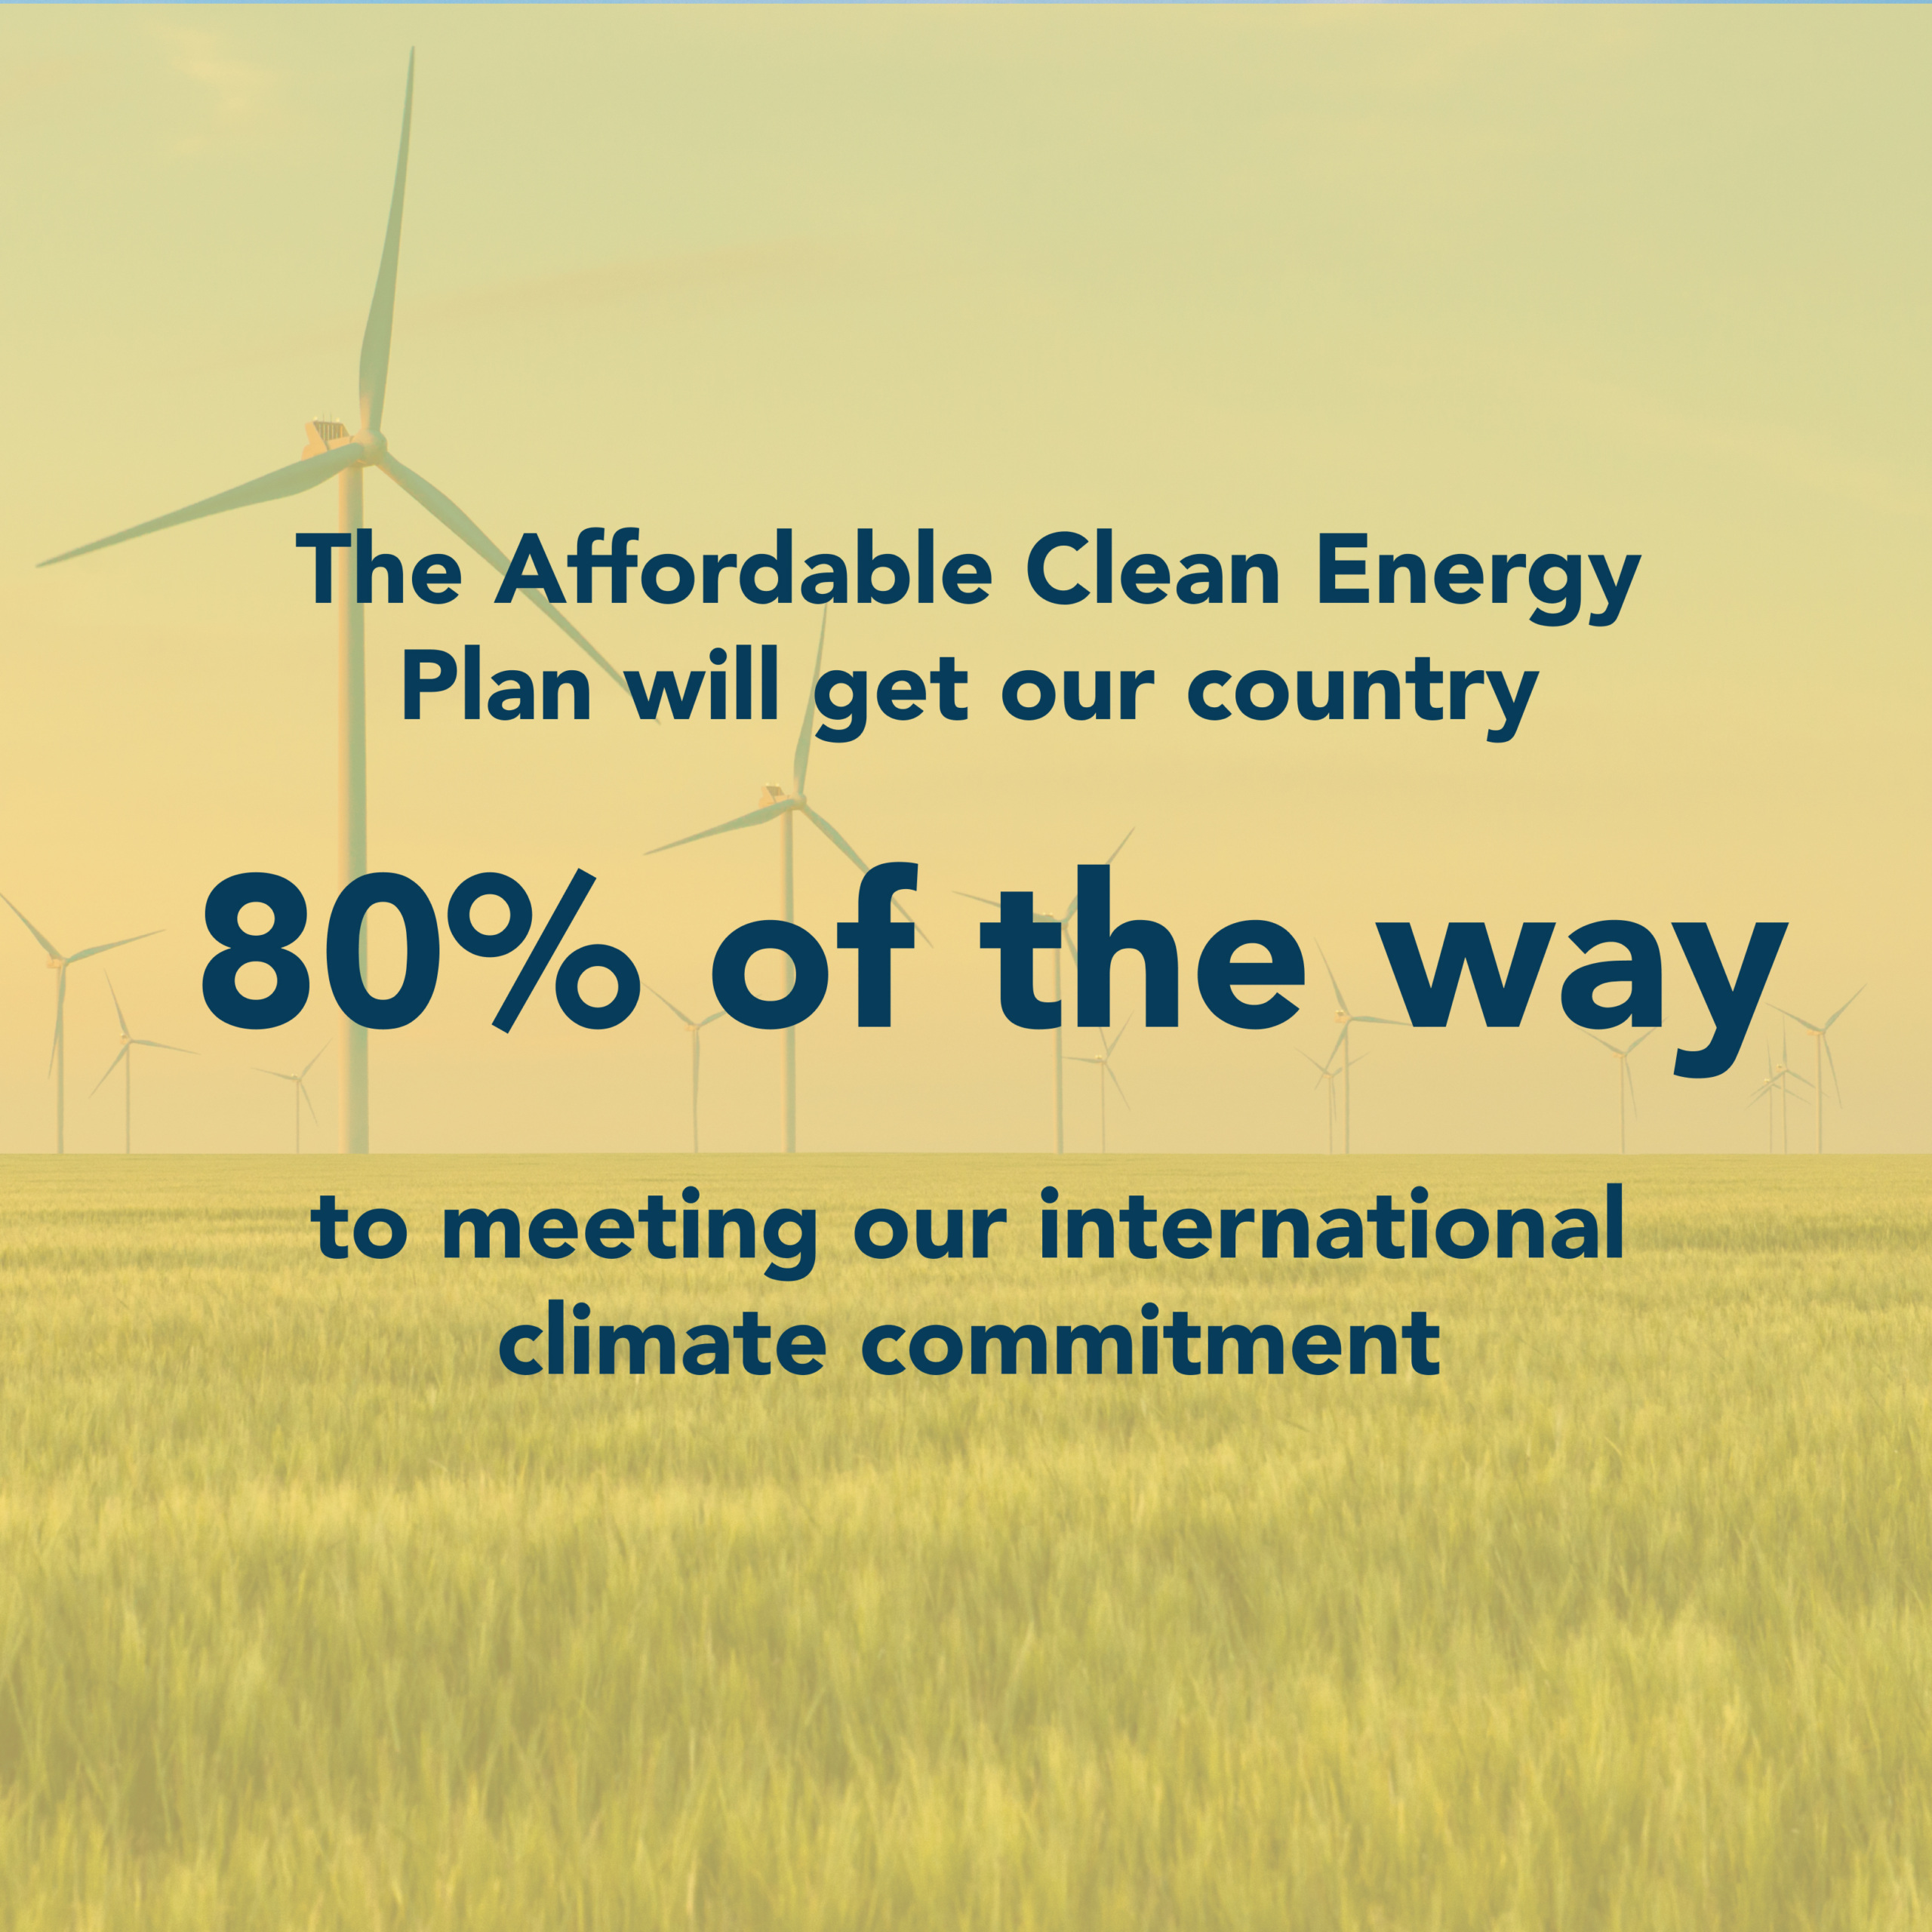 An image of windmills on a field. There is black text superimposed over them that reads The Affordable Clean Energy Plan will get our country 80% of the way to meat our international climate commitment.